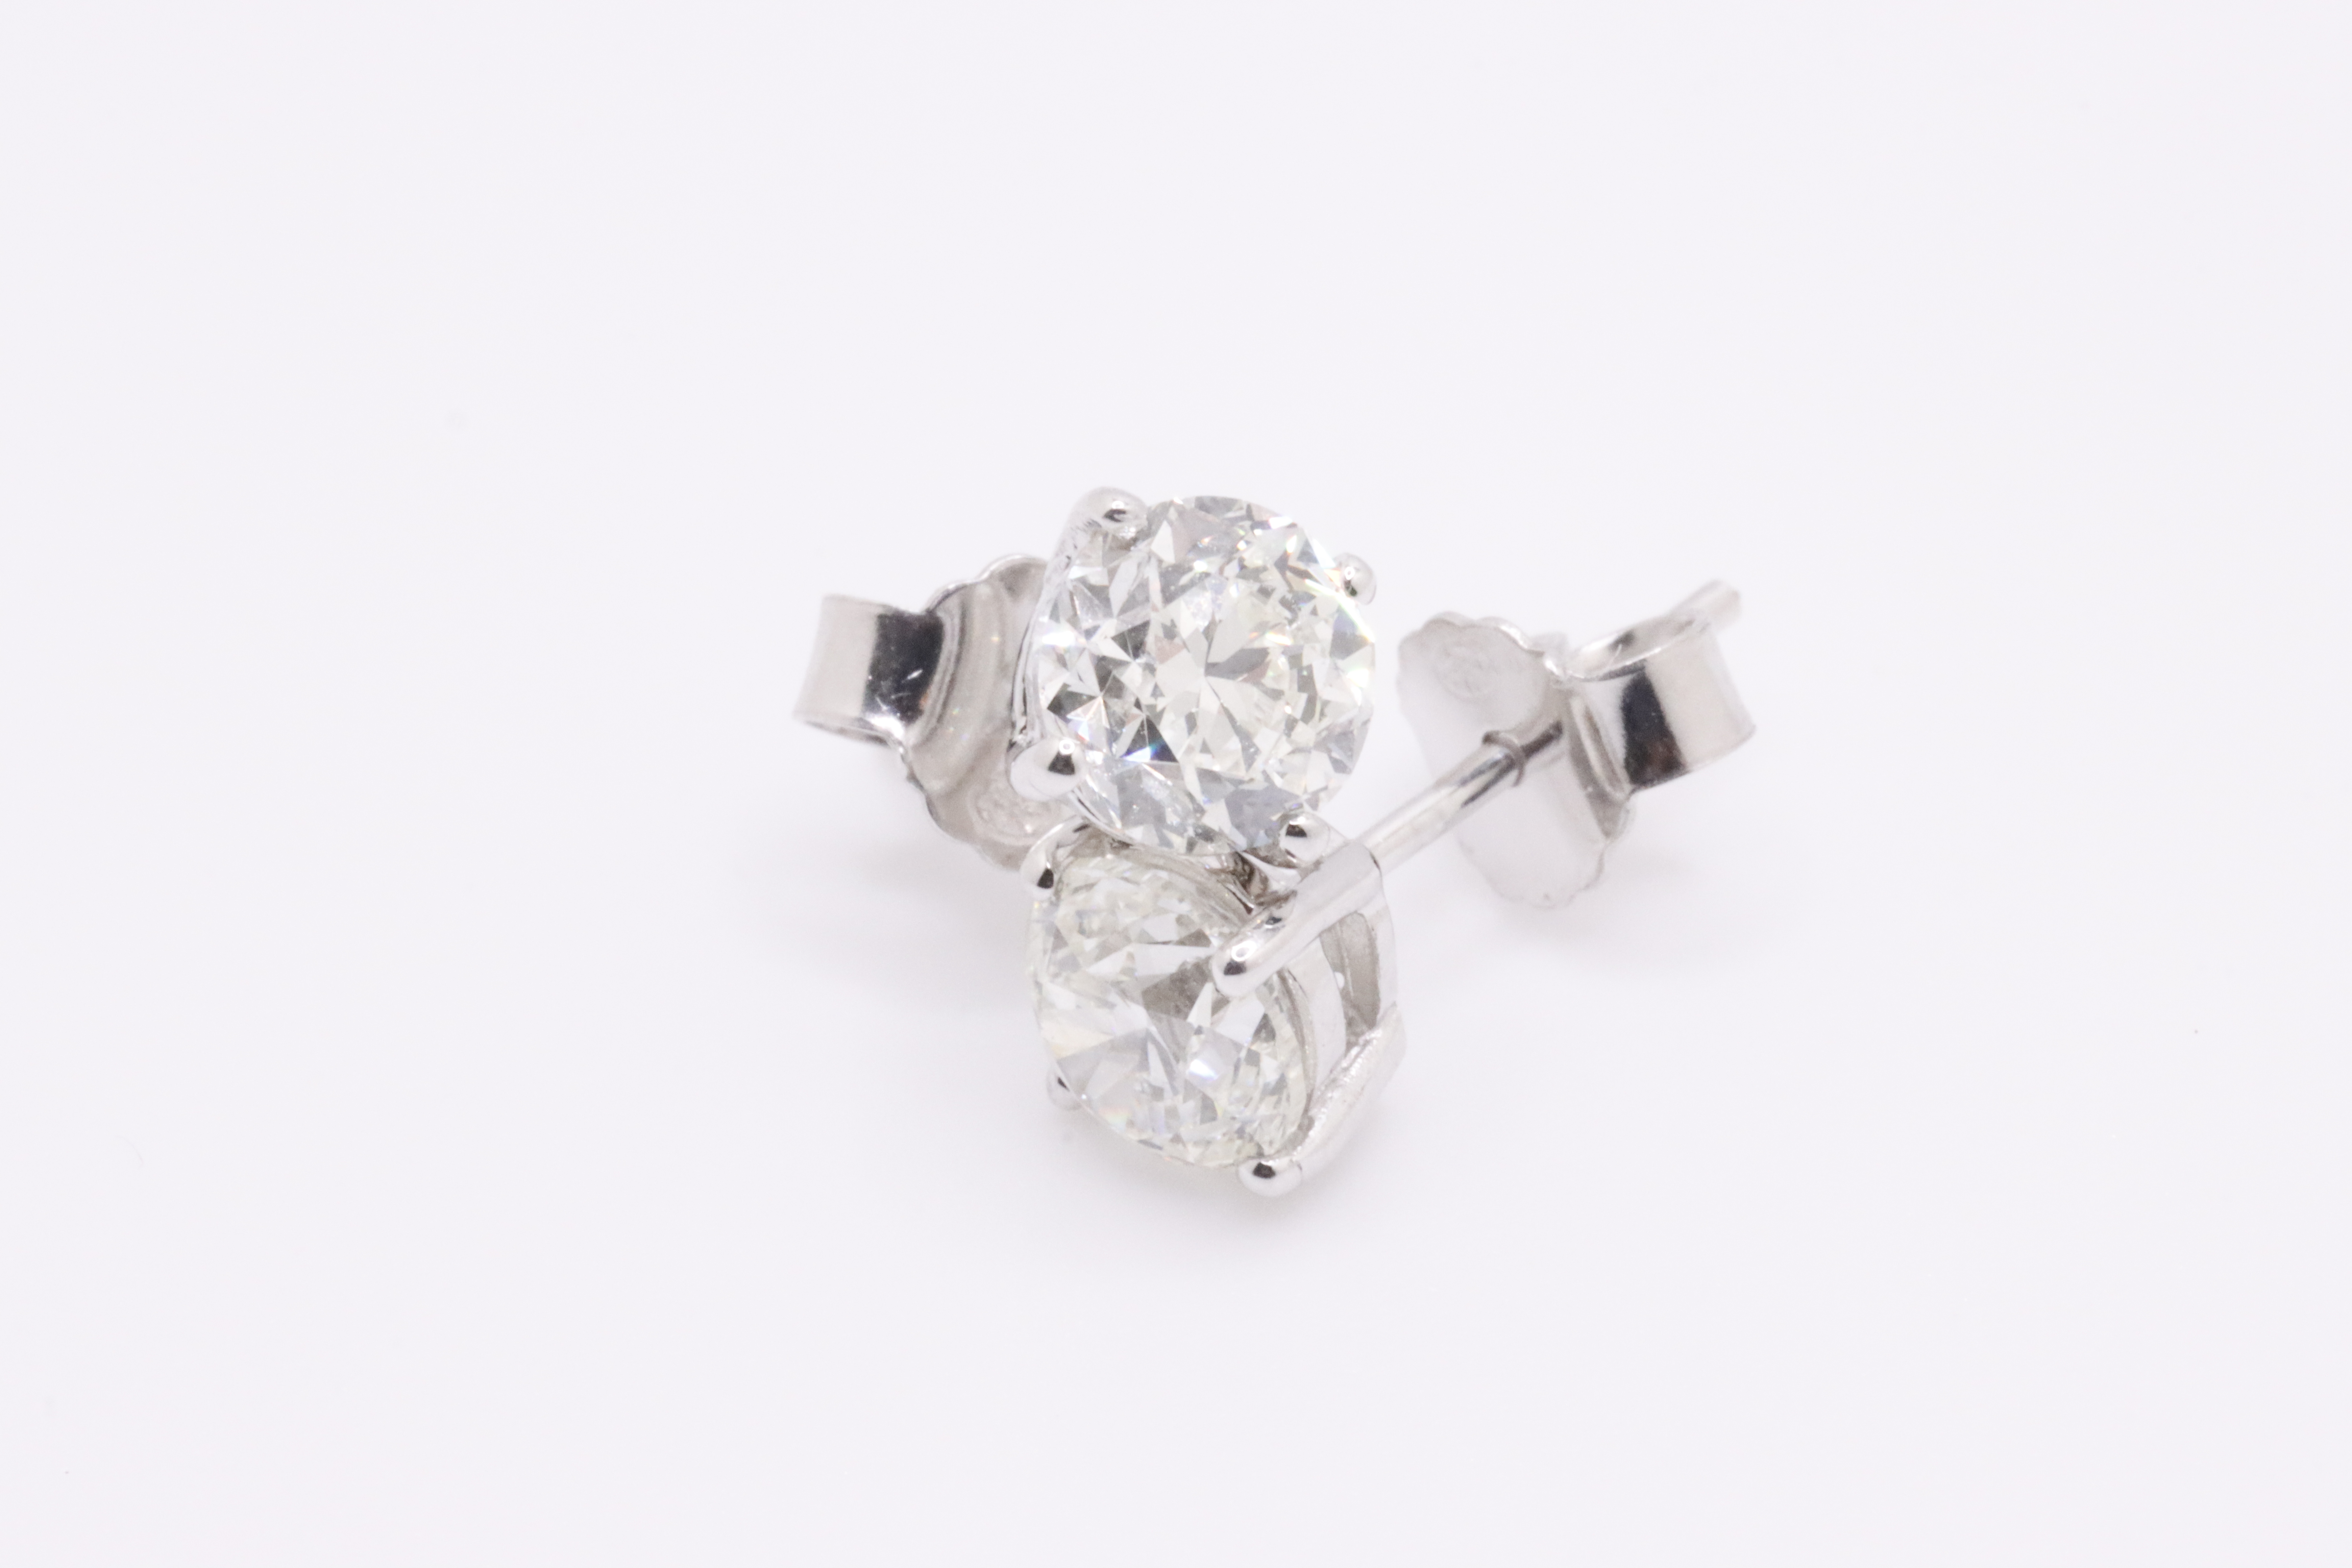 ** ON SALE ** Round Brilliant Cut 1.00 Carat Diamond 18kt White Gold Earrings- F Colour VS Clarity - Image 4 of 5